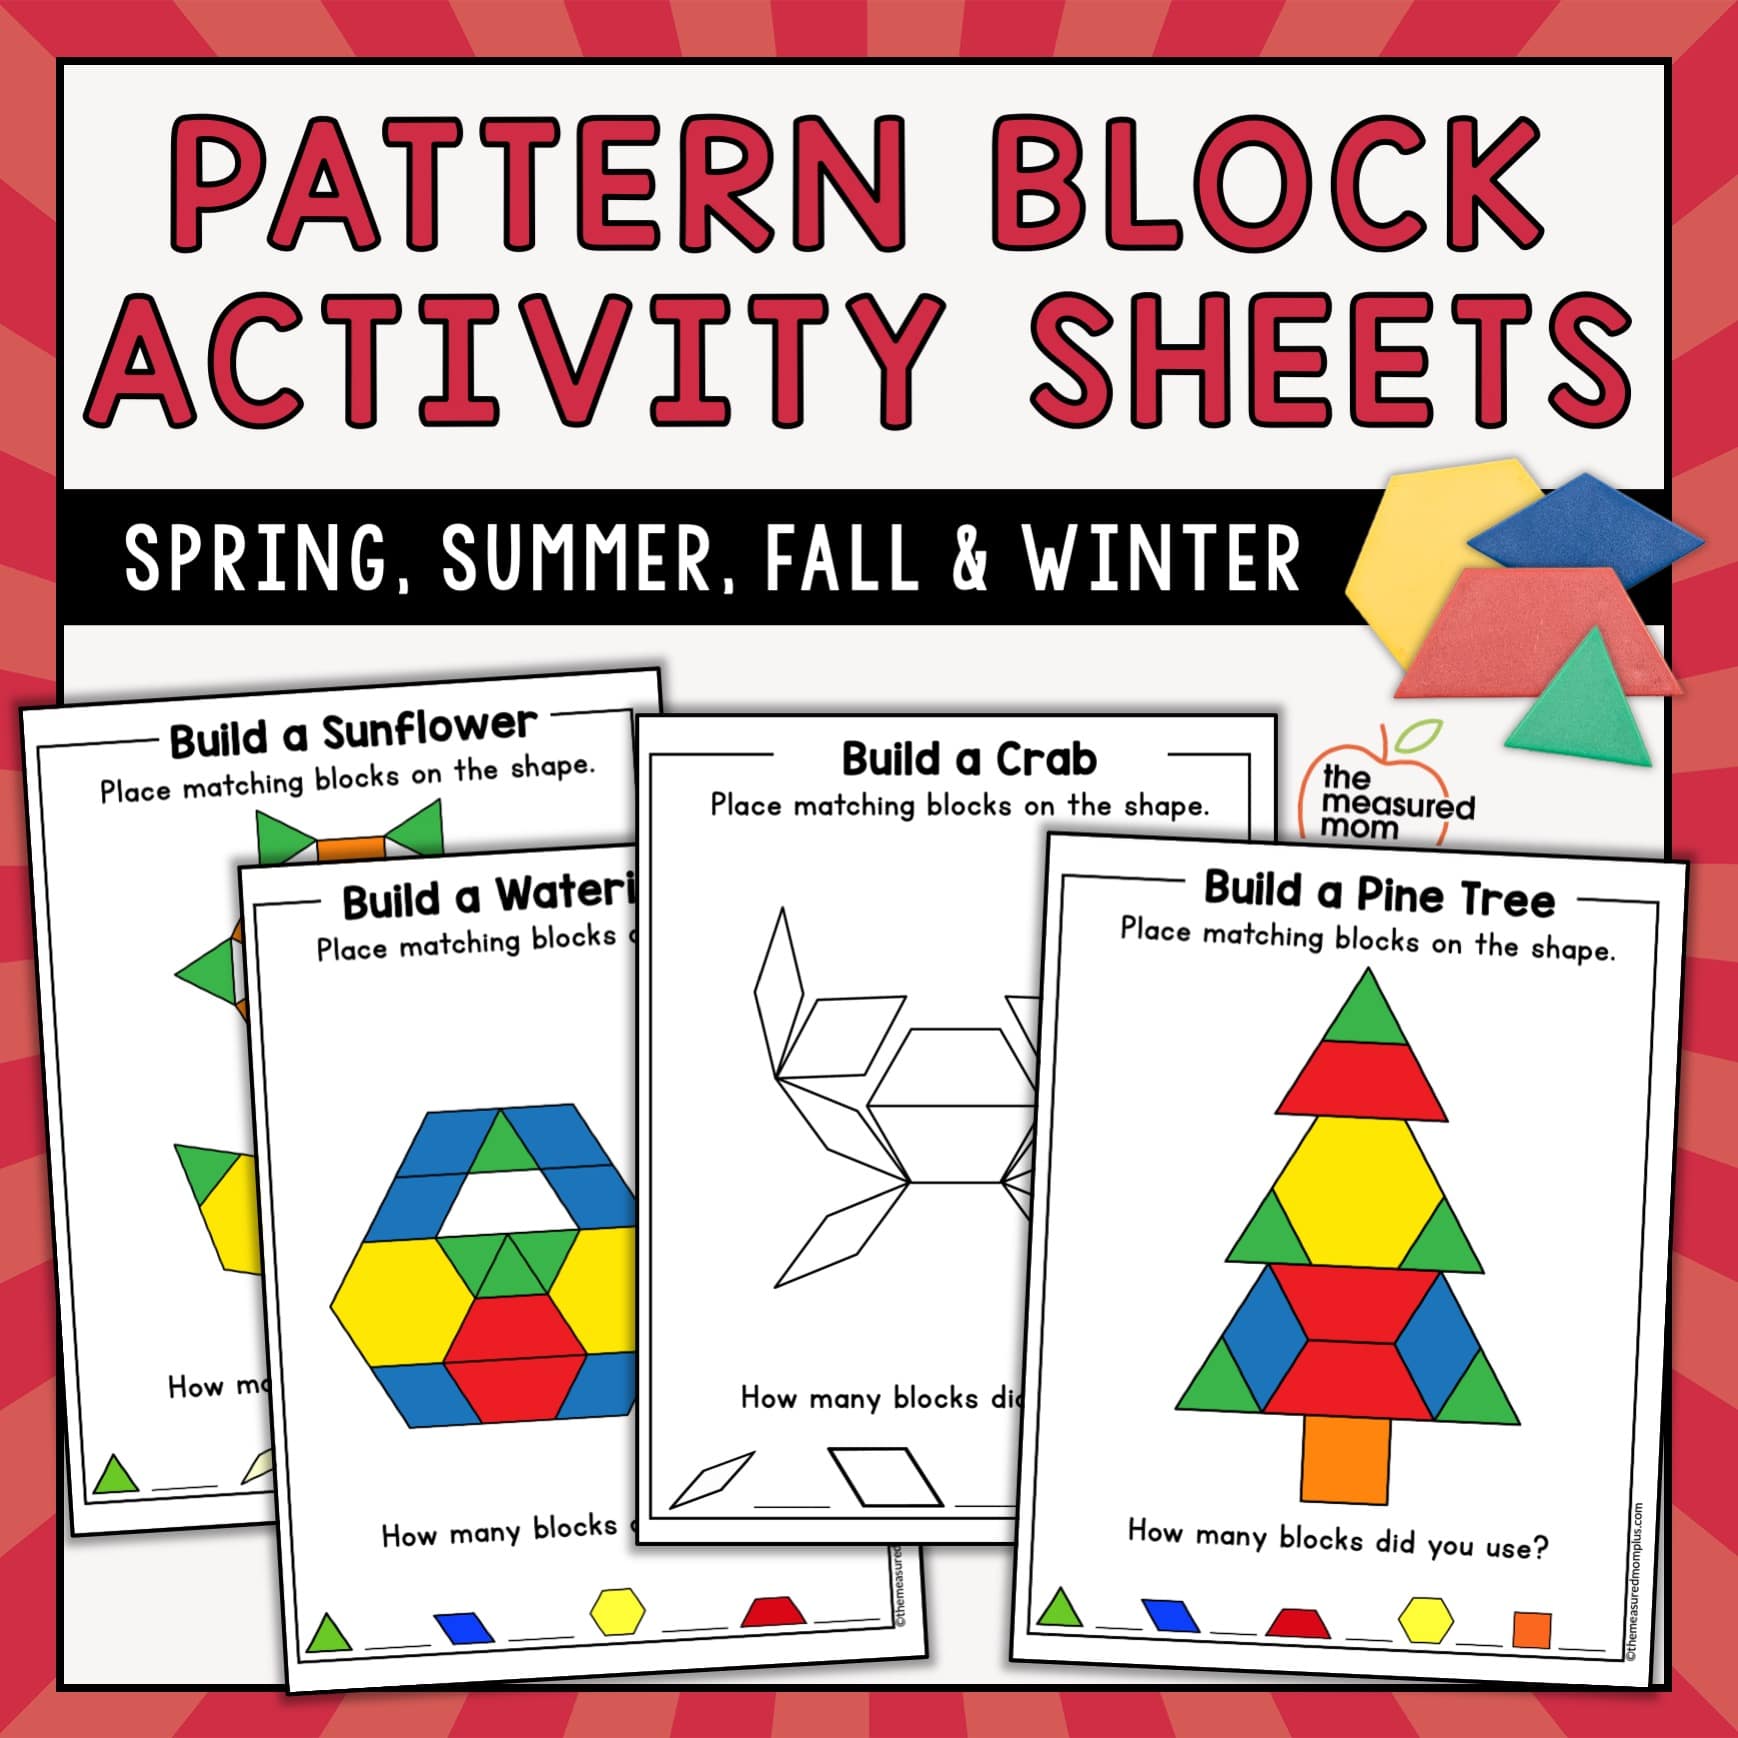 Sheets　Activity　Mom　Pattern　Measured　Block　The